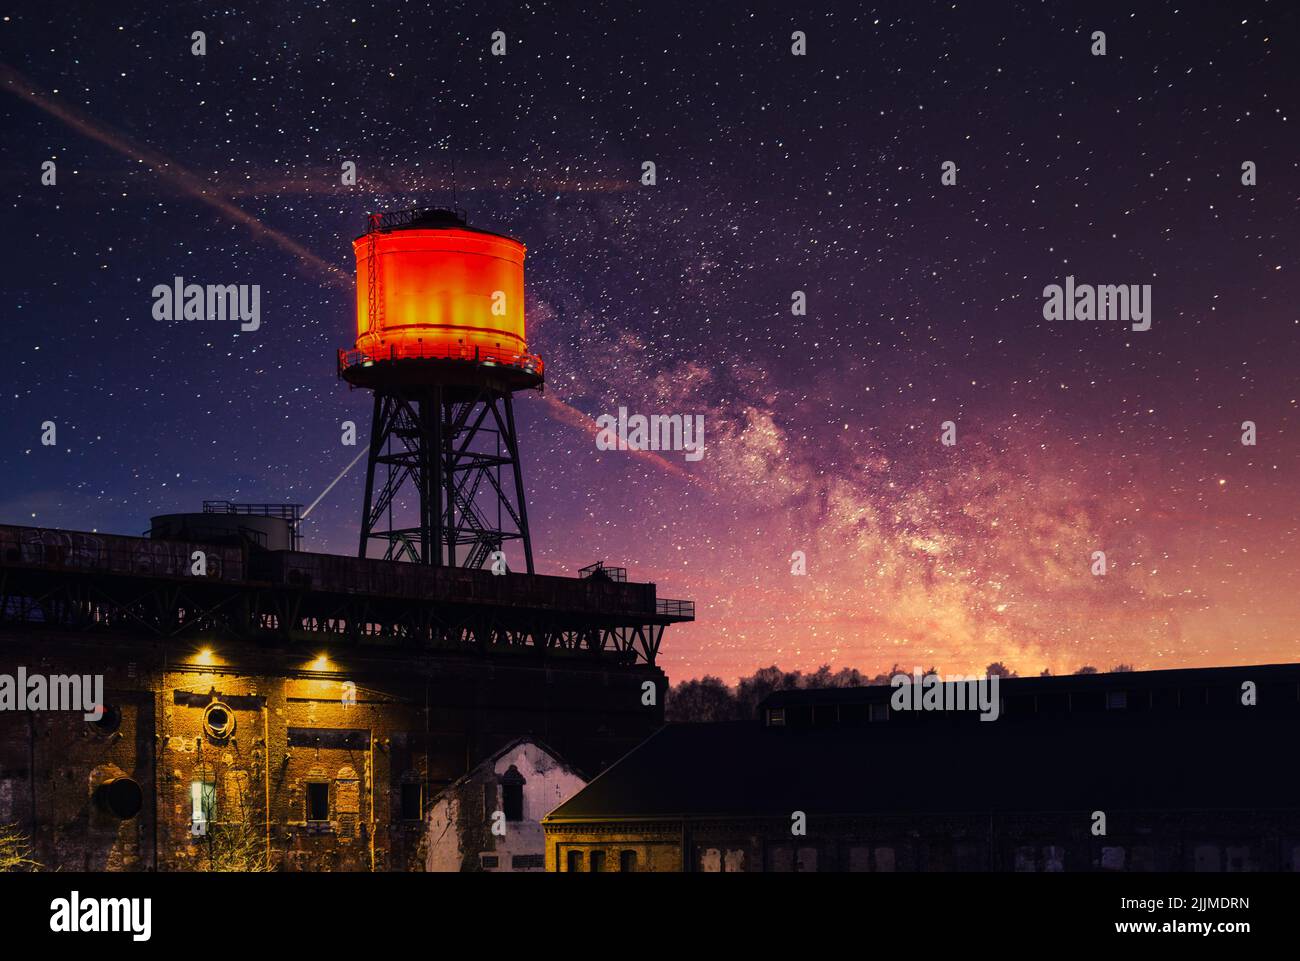 A water tower with red lights during night under the beautiful starry  sky in Bochum, Ruhr, Germany Stock Photo